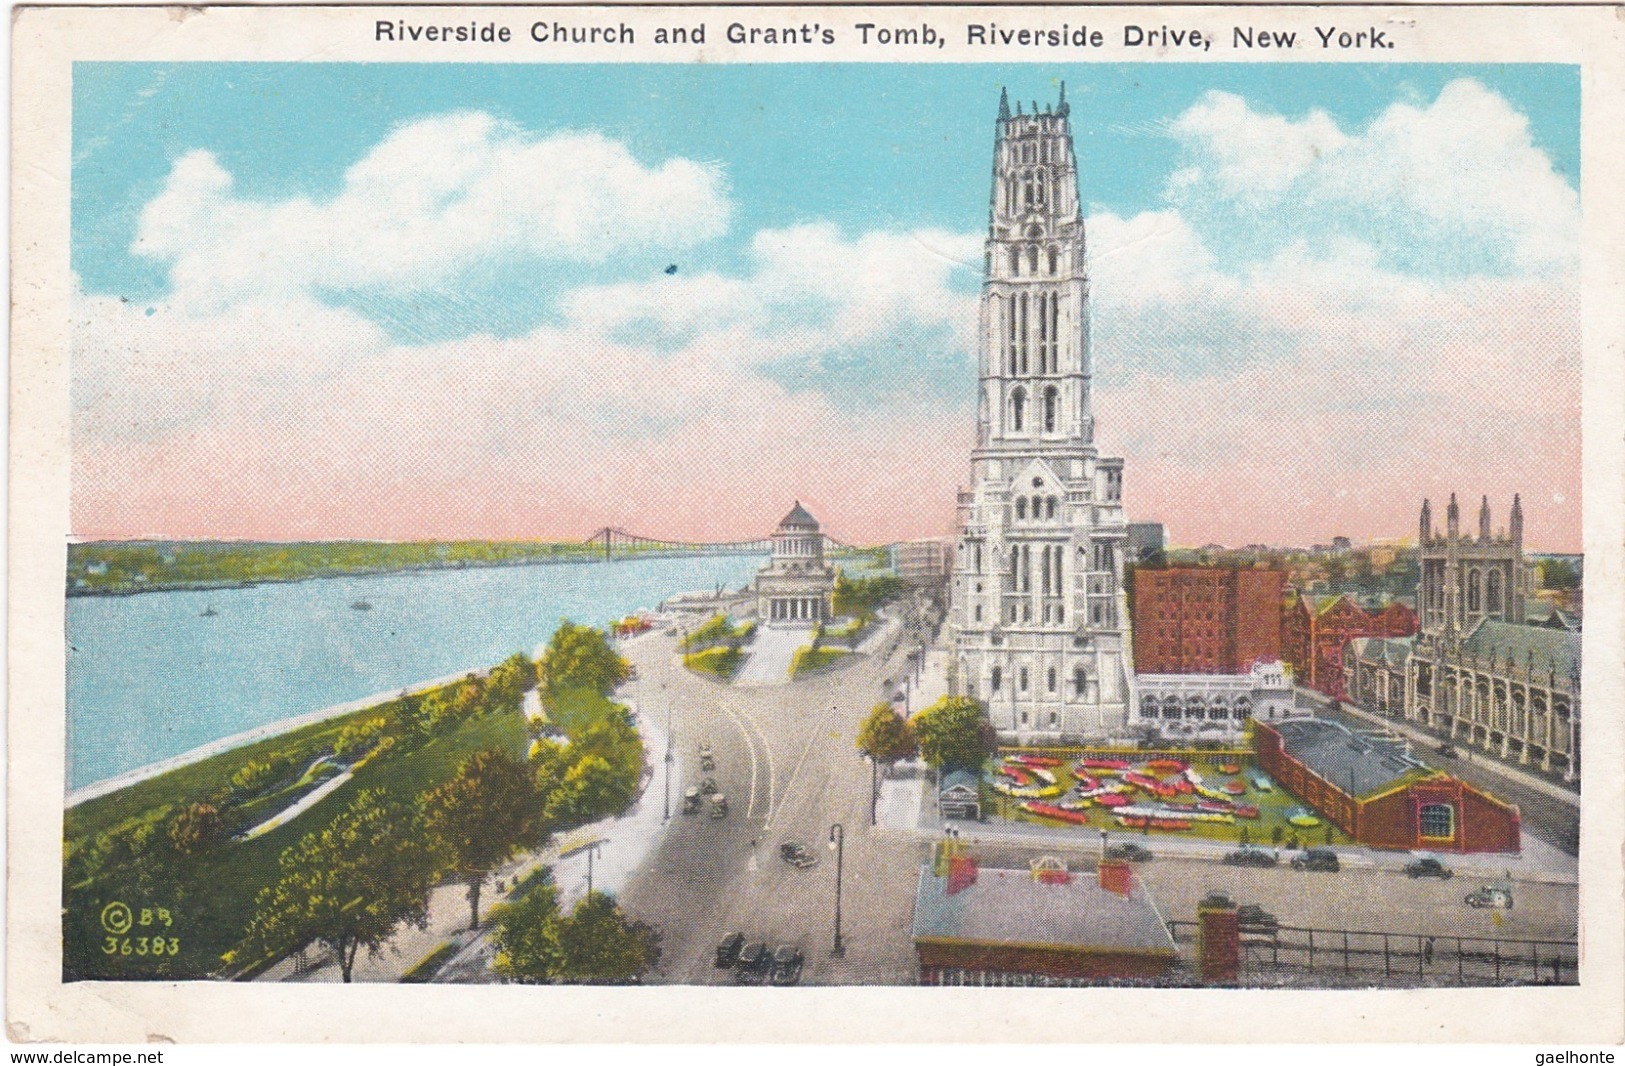 1789 NEW YORK - RIVERSIDE DRIVE - RIVERSIDE CHURCH AND GRANT'S TOMB - Autres Monuments, édifices